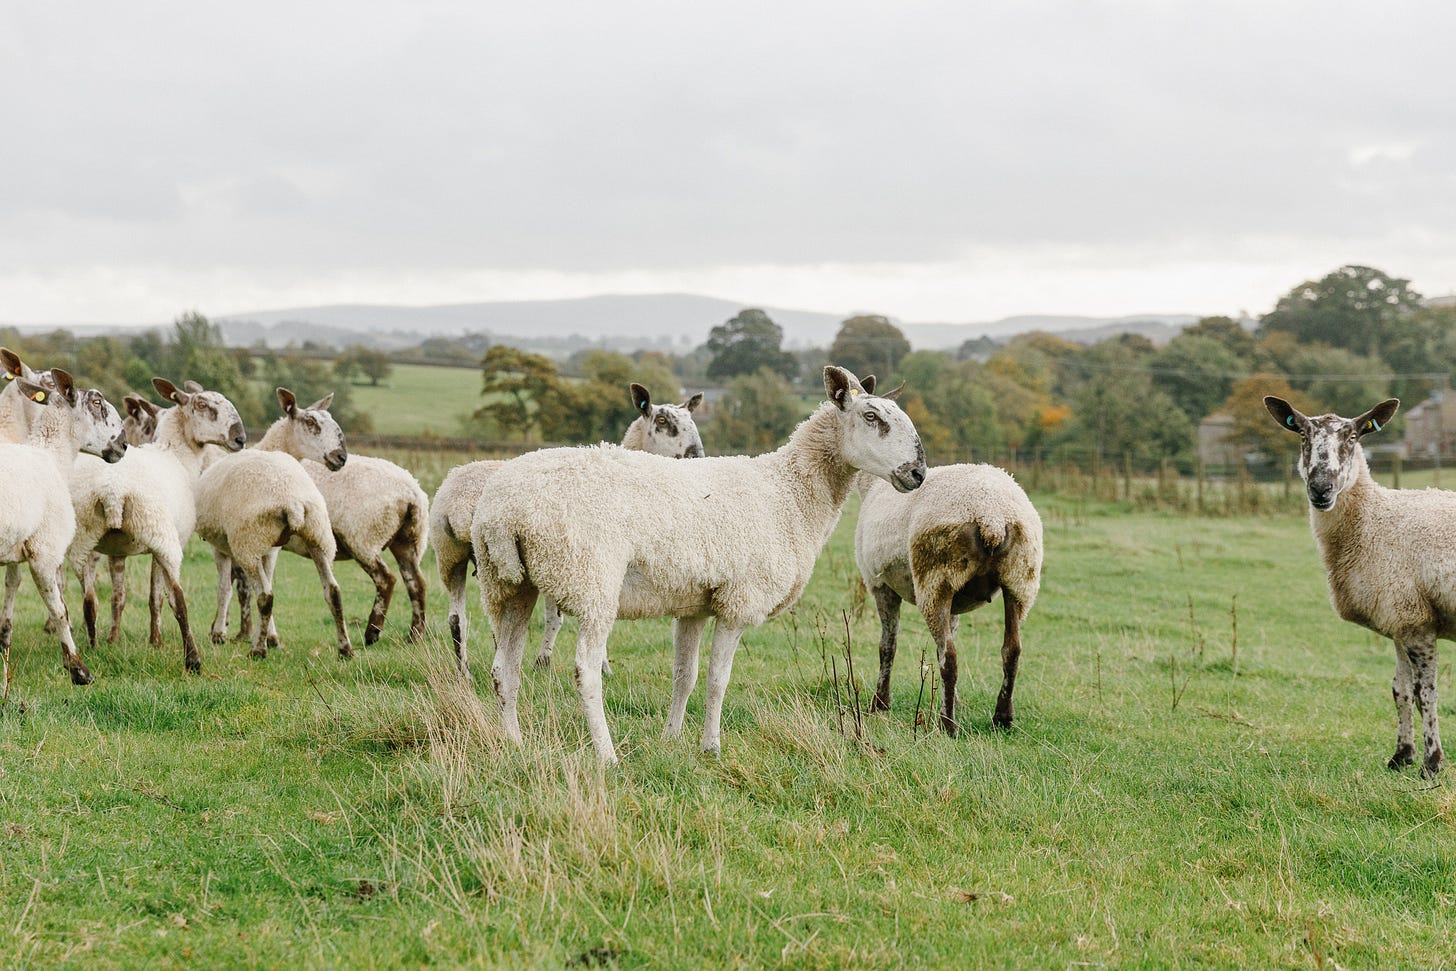 A group of sheep stood in a field on a cloudy day.